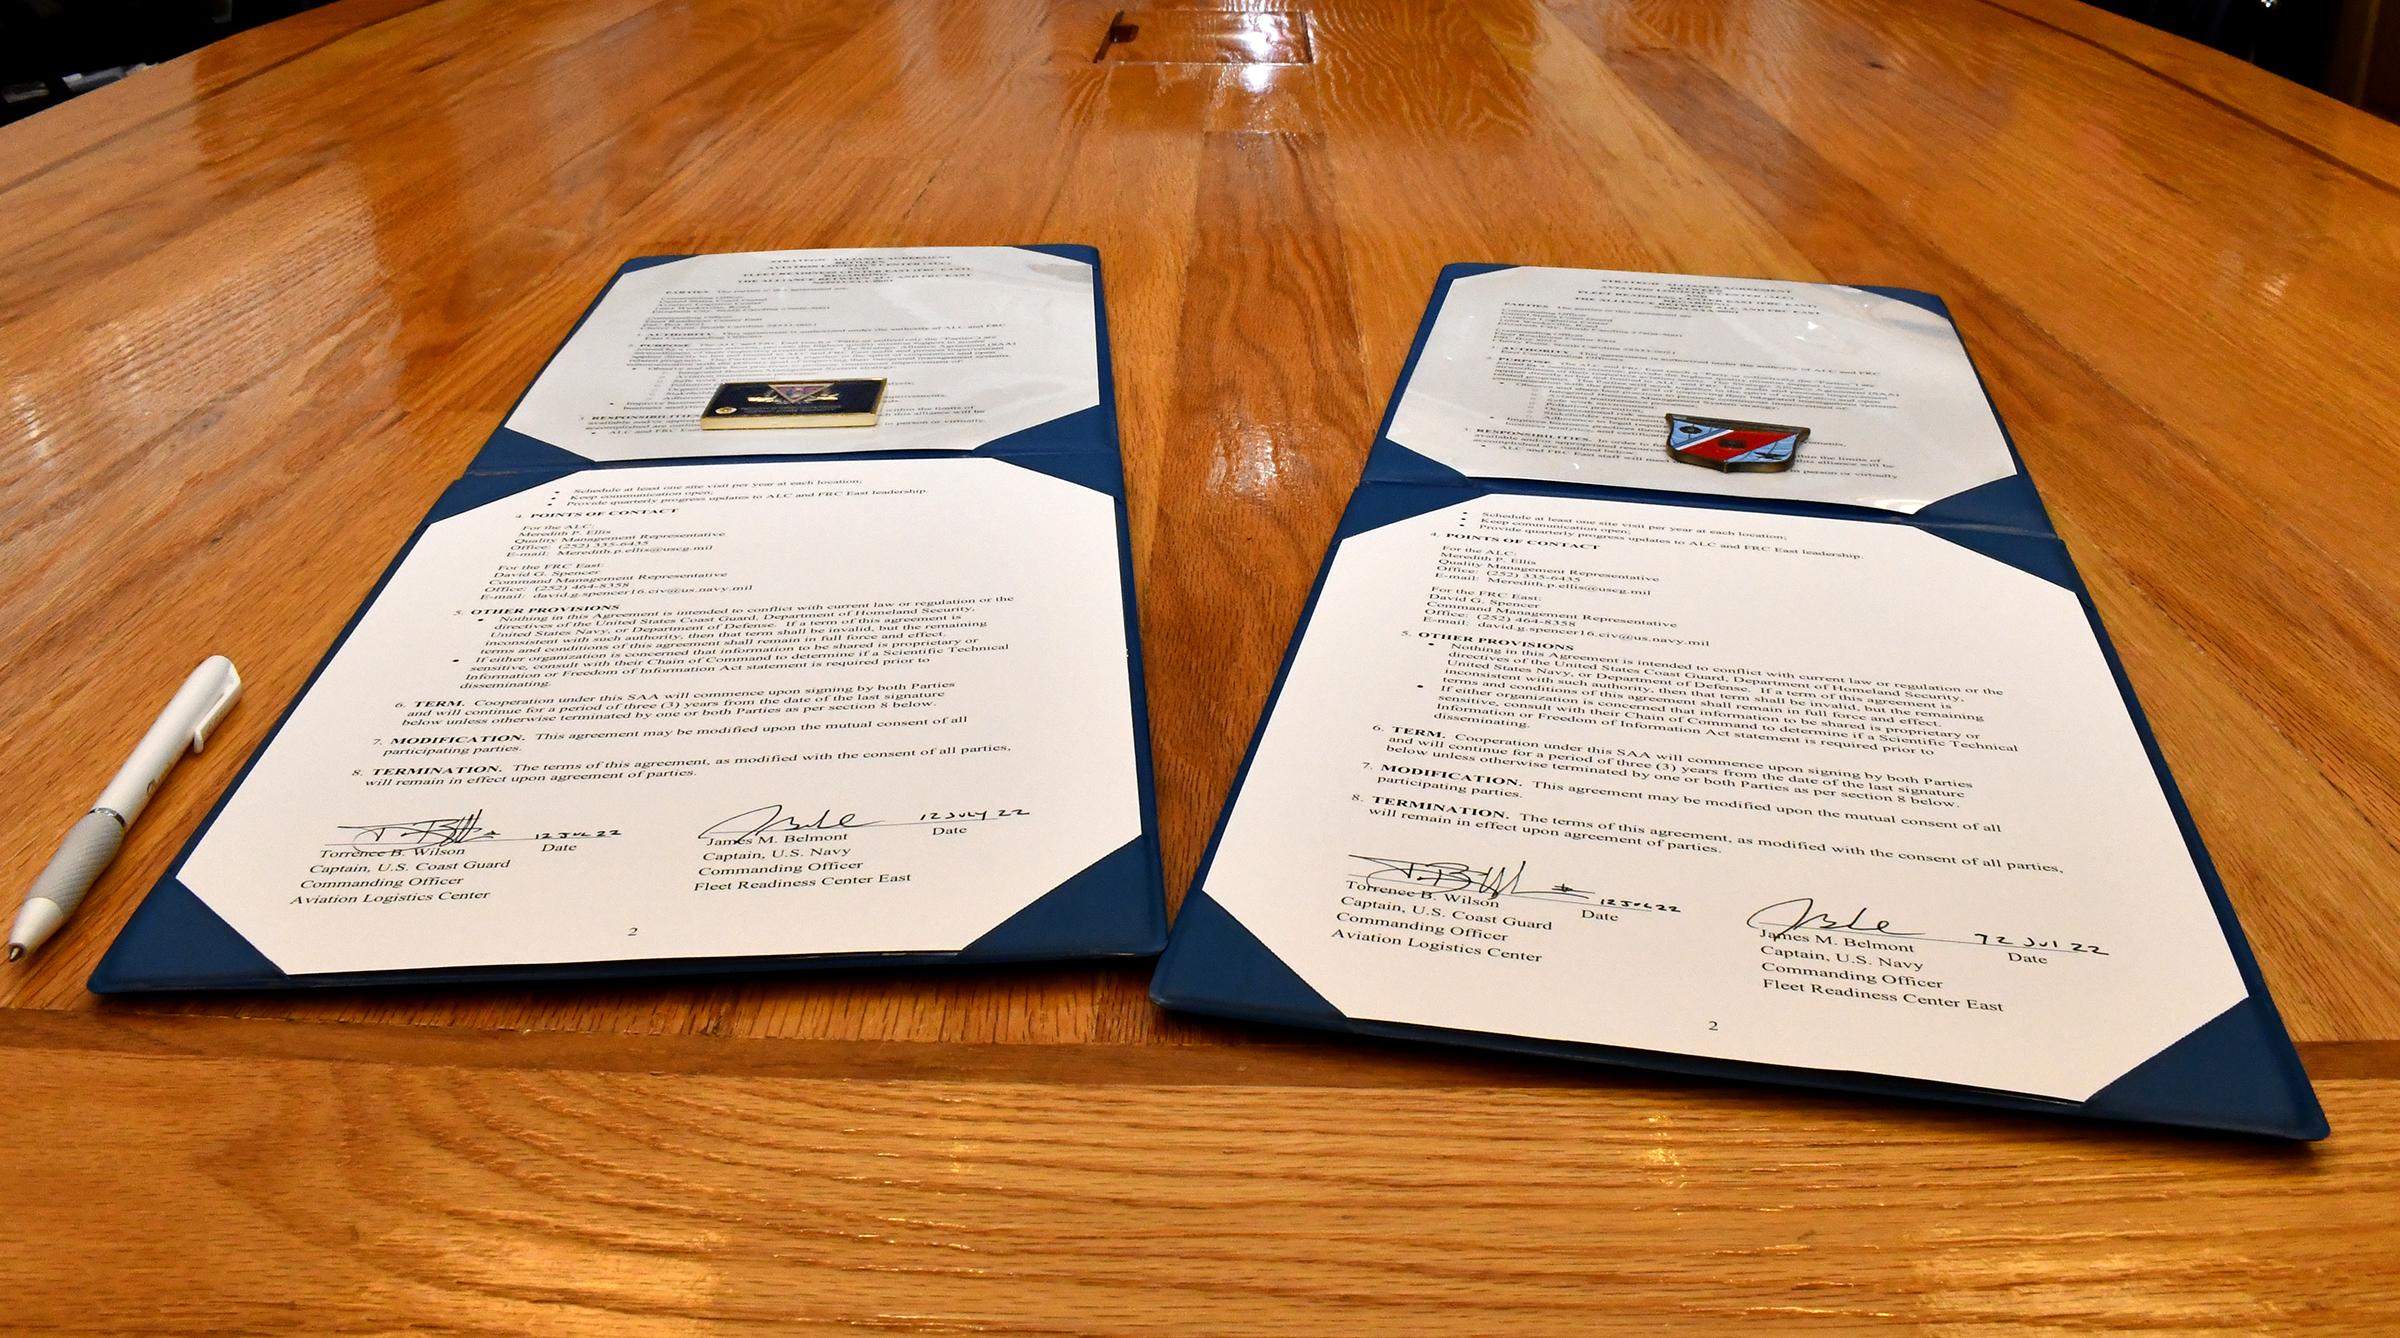 Two challenge coins sit on top of signed documents